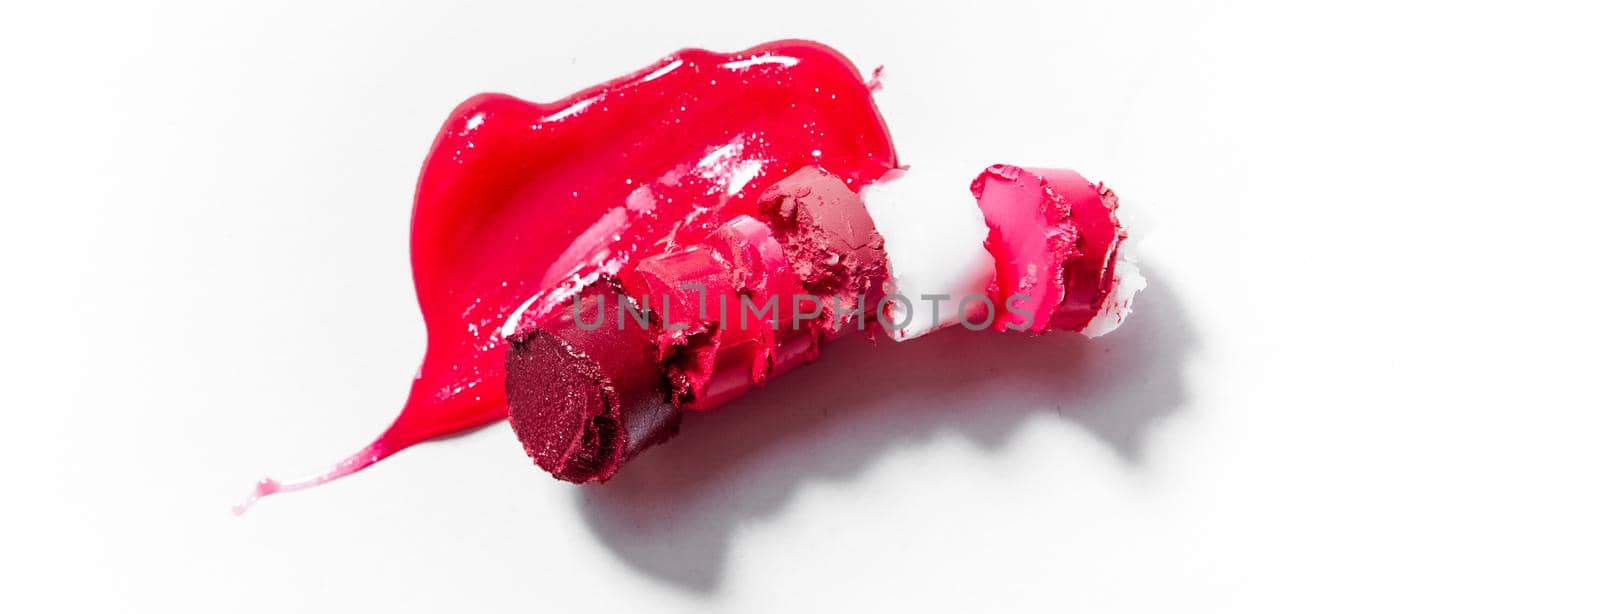 Beauty texture, cosmetic product and art of make-up concept - Cutted and liquid lipstick close-up isolated on white background